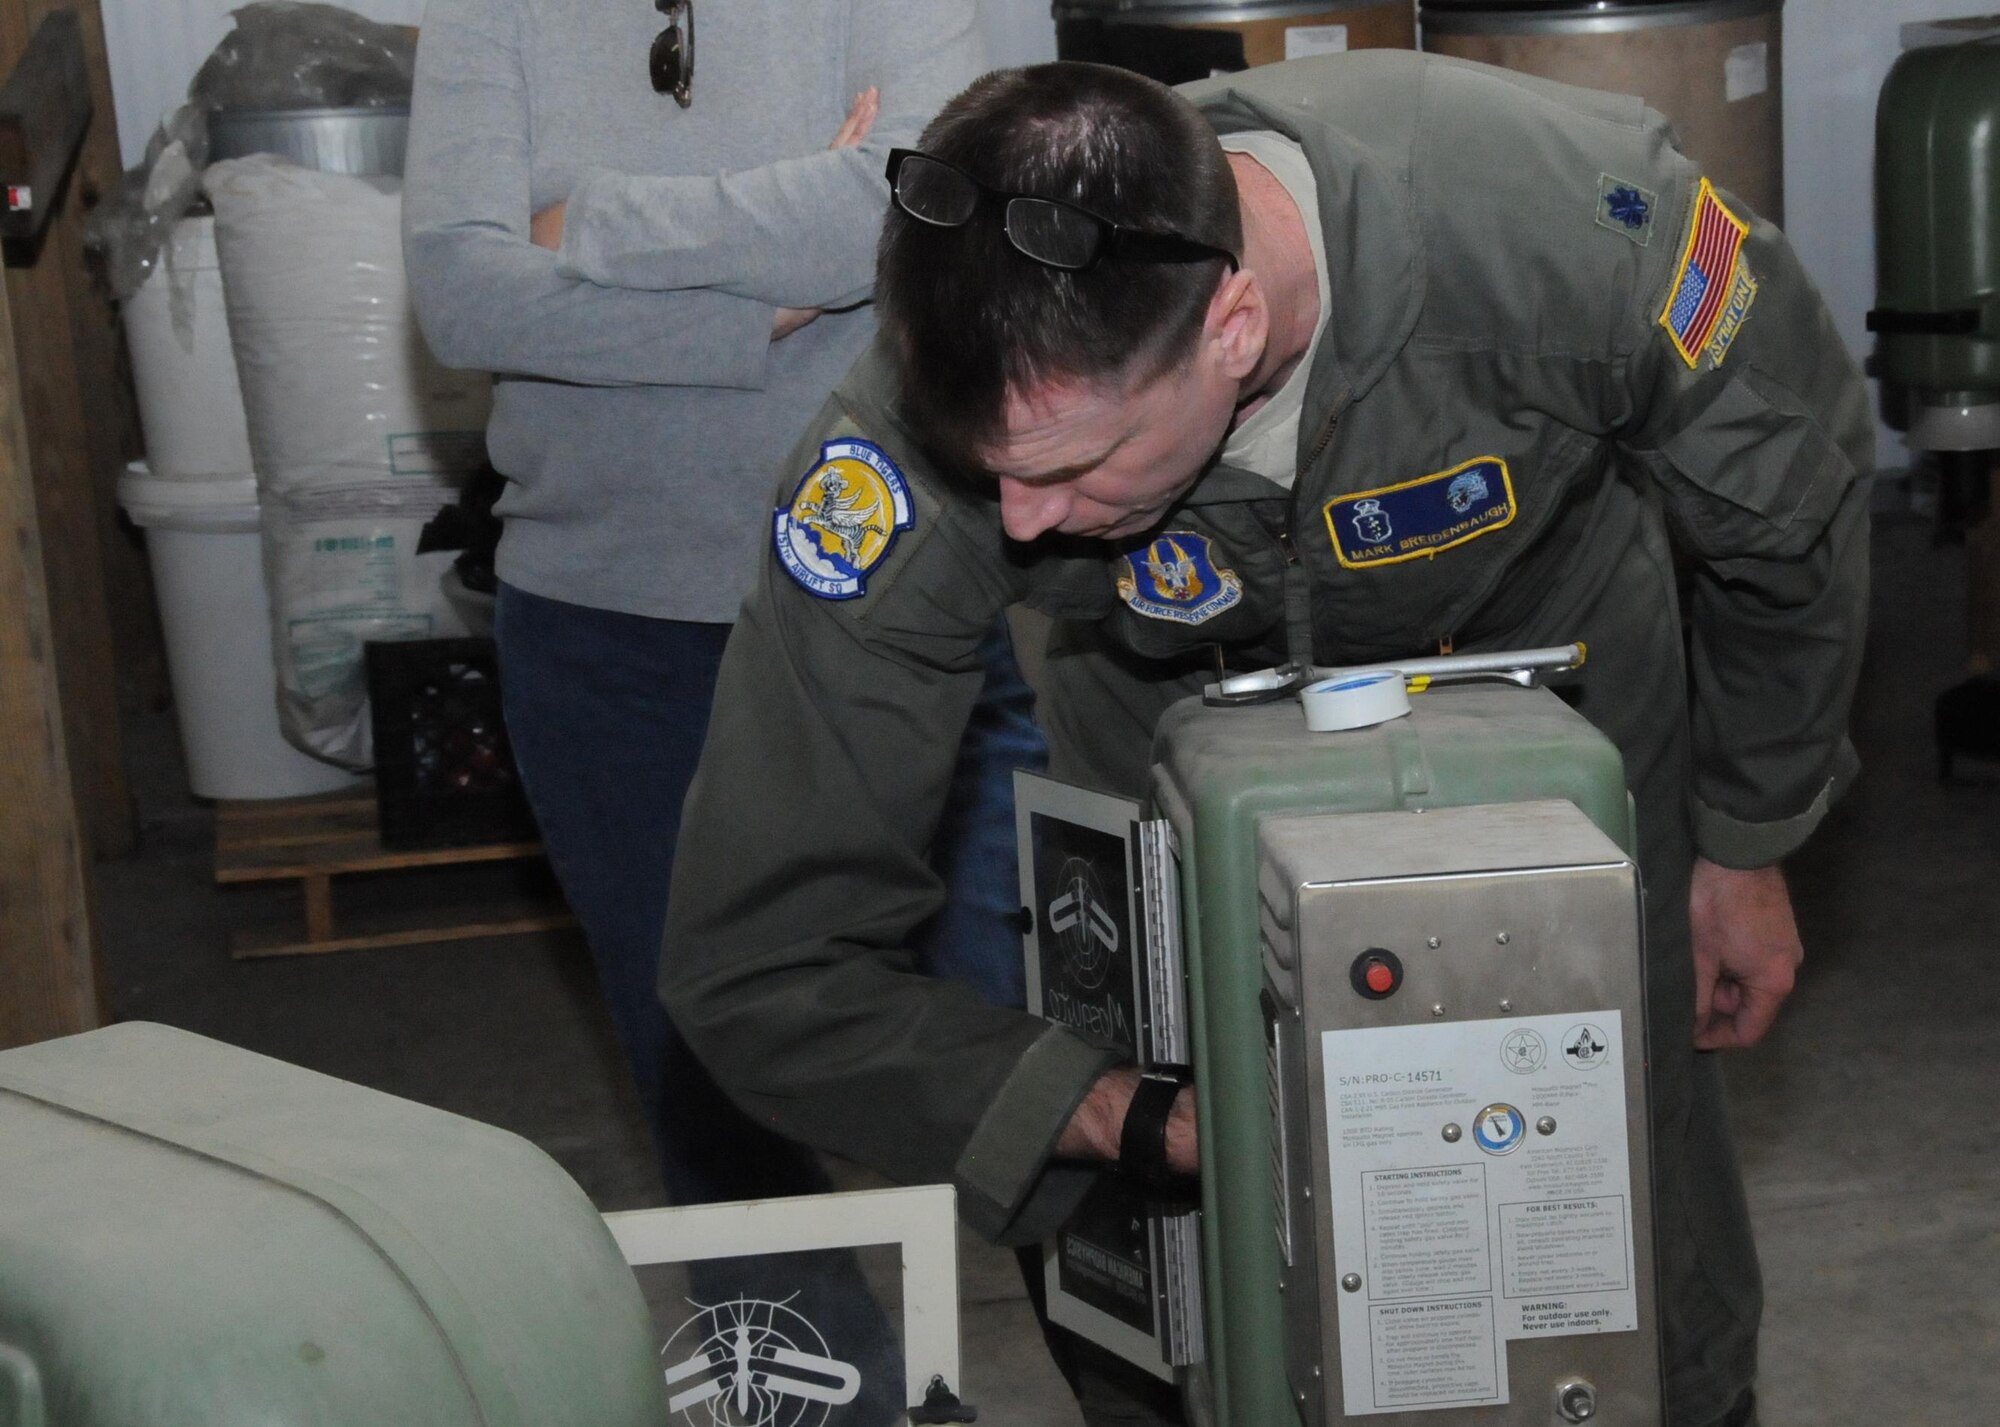 Lt. Col. Mark Breidenbaugh, an entomologist assigned to the 757th Airlift Squadron out of Youngstown, Ohio, inspects mosquito magnet units which will be used in an upcoming aerial spray mission, here April 6, 2016. The aerial spray unit comes here on a yearly basis to help reduce the mosquito and noseeum (small biting gnats) populations. Past studies have shown the spraying to reduce the mosquito and noseeum population by more than 80 percent. (U.S. Air Force photo/Tech. Sgt. Rick Lisum)